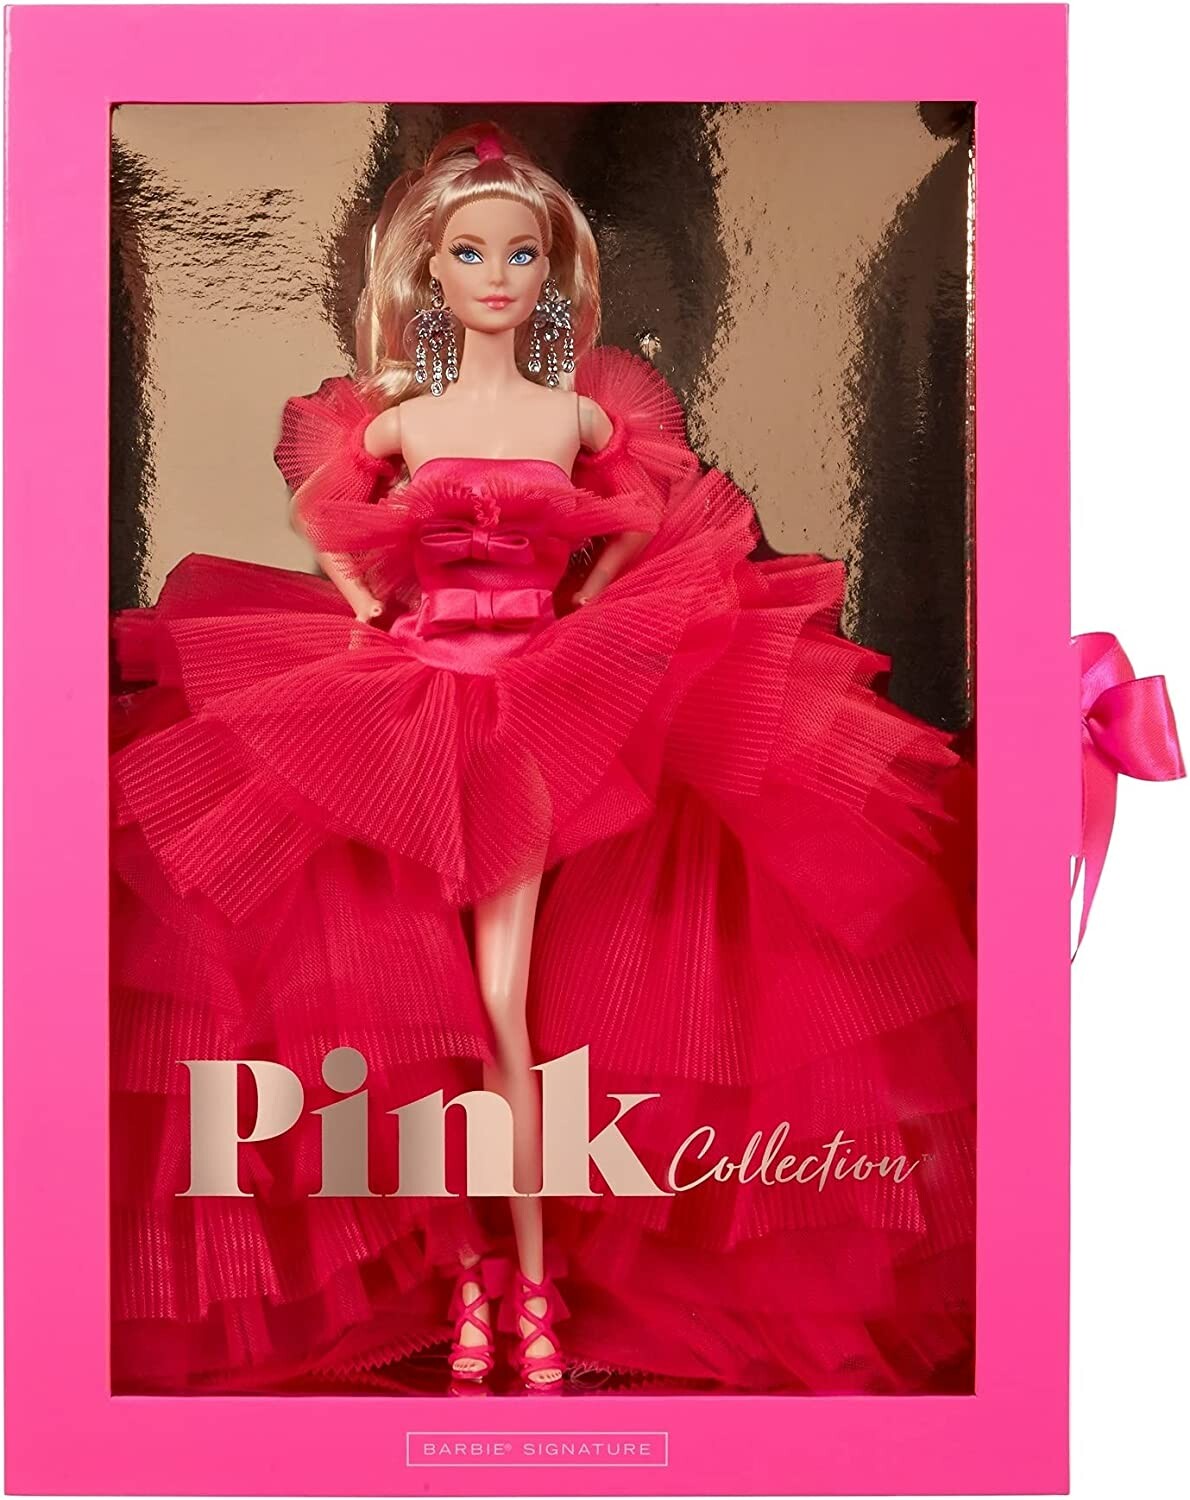 https://content.pearl.fr/media/cache/default/article_ultralarge_high_nocrop/shared/images/articles/T/TG2/poupee-barbie-signature-pink-collection-ref_TG2361_4.jpg